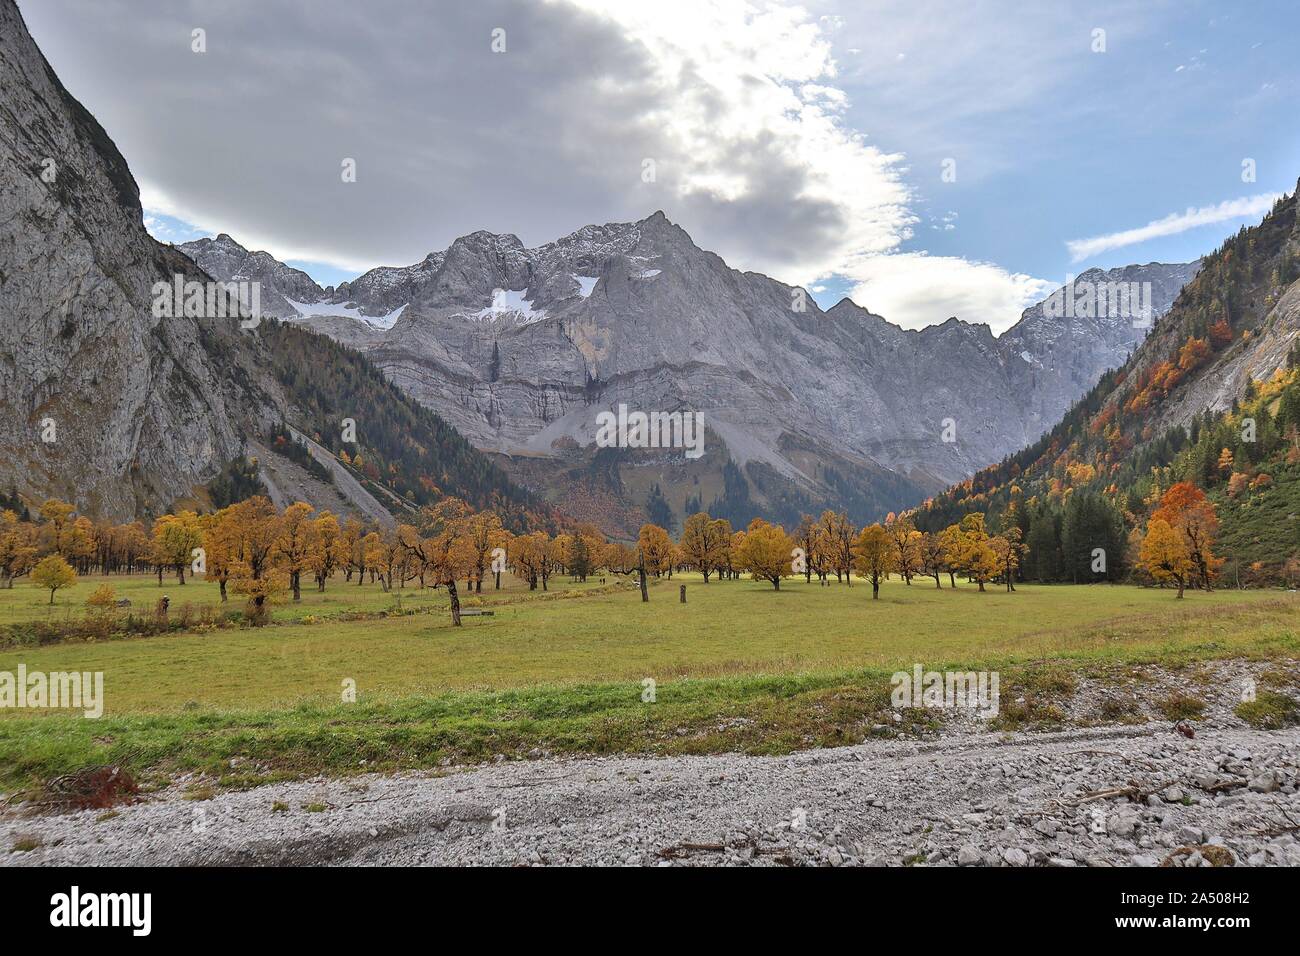 Eng, Austria 14.10. 2019: Impressions Grosser Ahornboden - 14.10.2019 Grosser Ahornboden in the Engtal. At the end of the valley the village of Eng in Tyrol, surrounded by the Karwendel mountains of Eiskarlspitze and Spritzkarspitze, the trademark is the numerous maple trees | usage worldwide Stock Photo